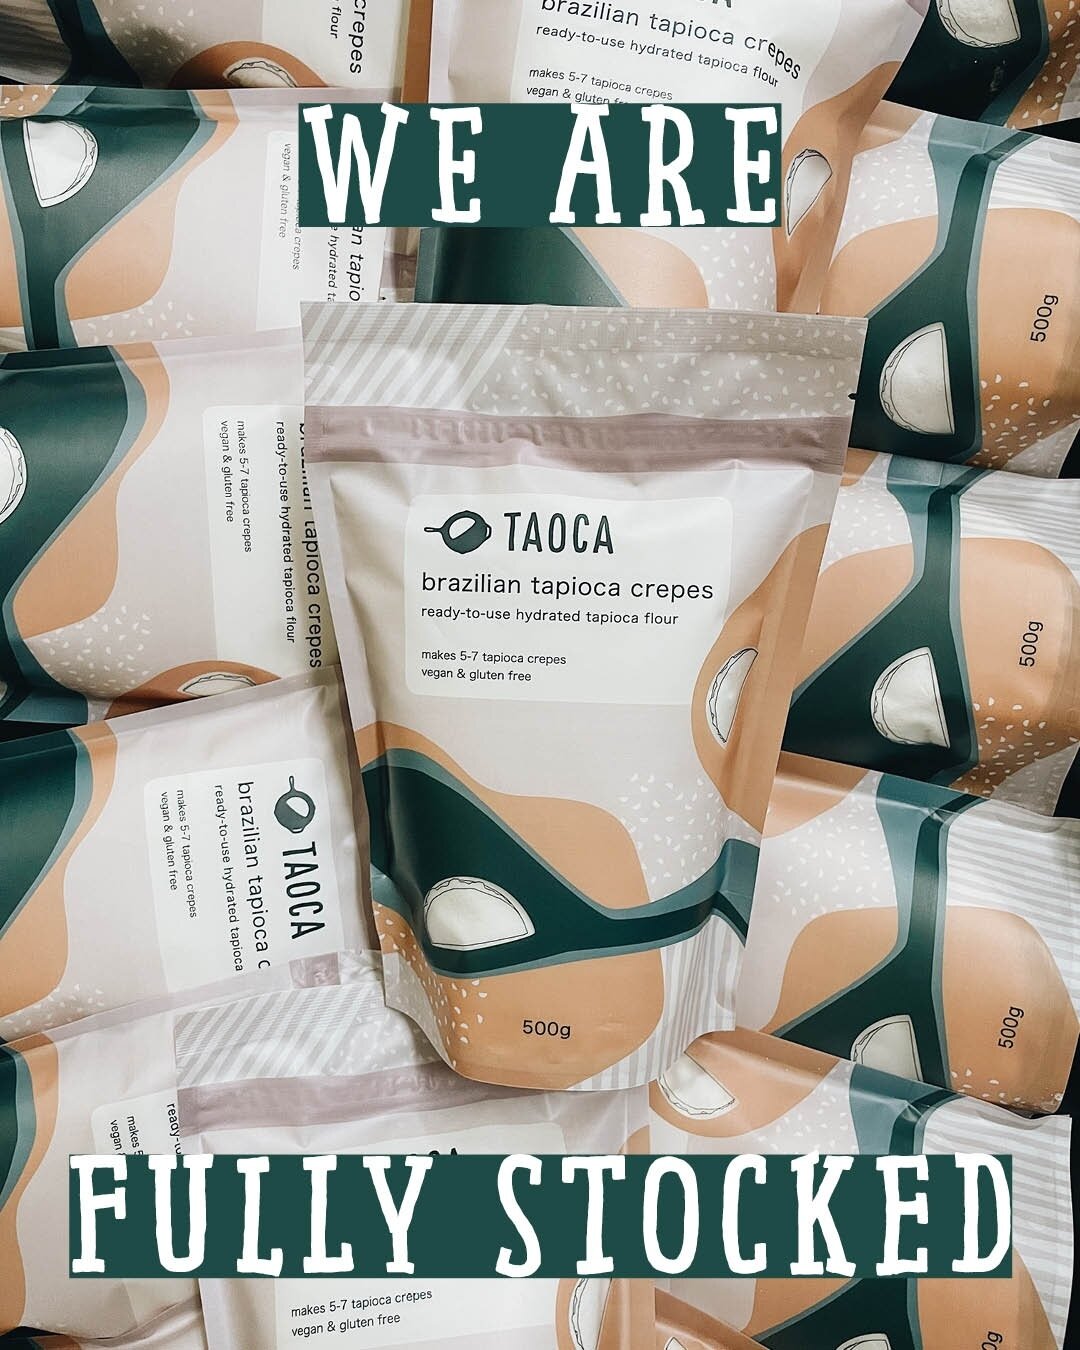 That's it guys, we're ready for your orders :) ⁠
⁠
Head to our website and order 3+ packets for free delivery Australia wide! ⁠
⁠
taoca.com.au/store⁠
⁠
🌮⁠
⁠
#glutenfreesydney #foodie #foodphotography #delicious #tapioca #cassava #glutenfreeaustralia